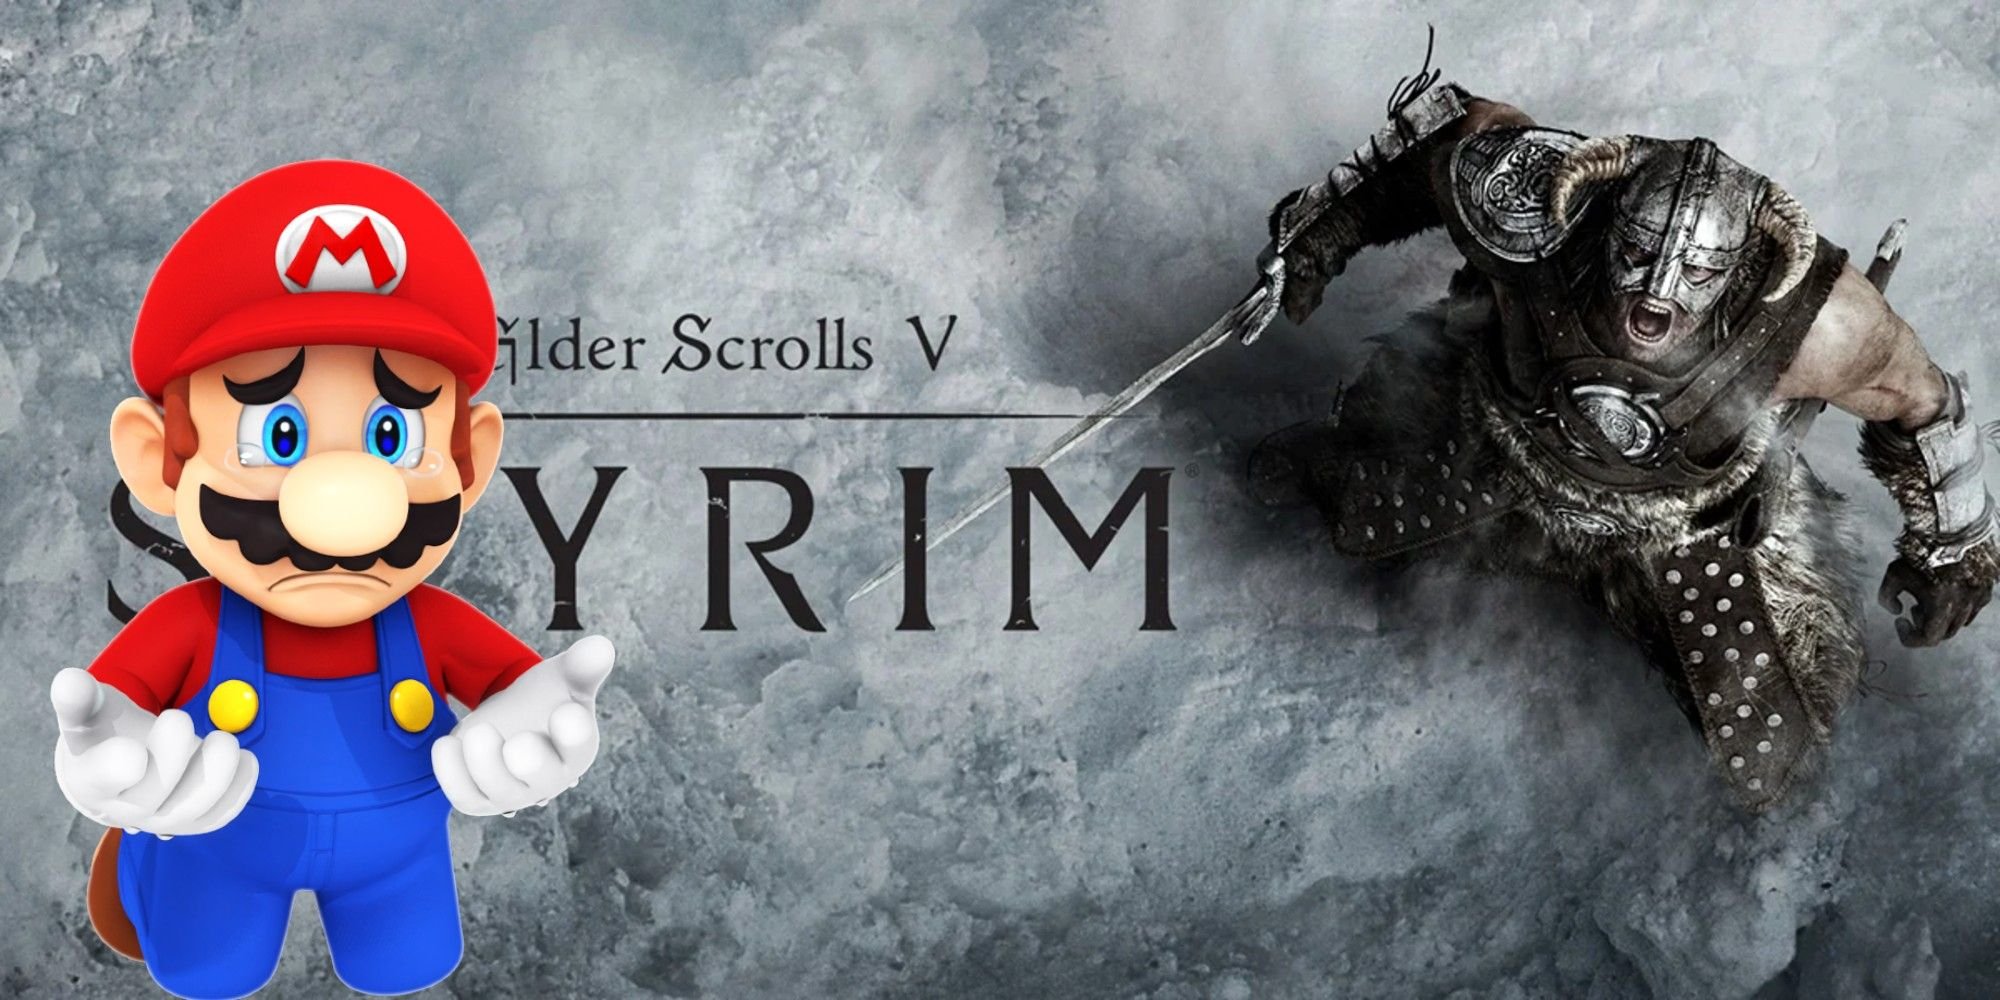 Someone Paid $600 For A Sealed Copy Of Skyrim